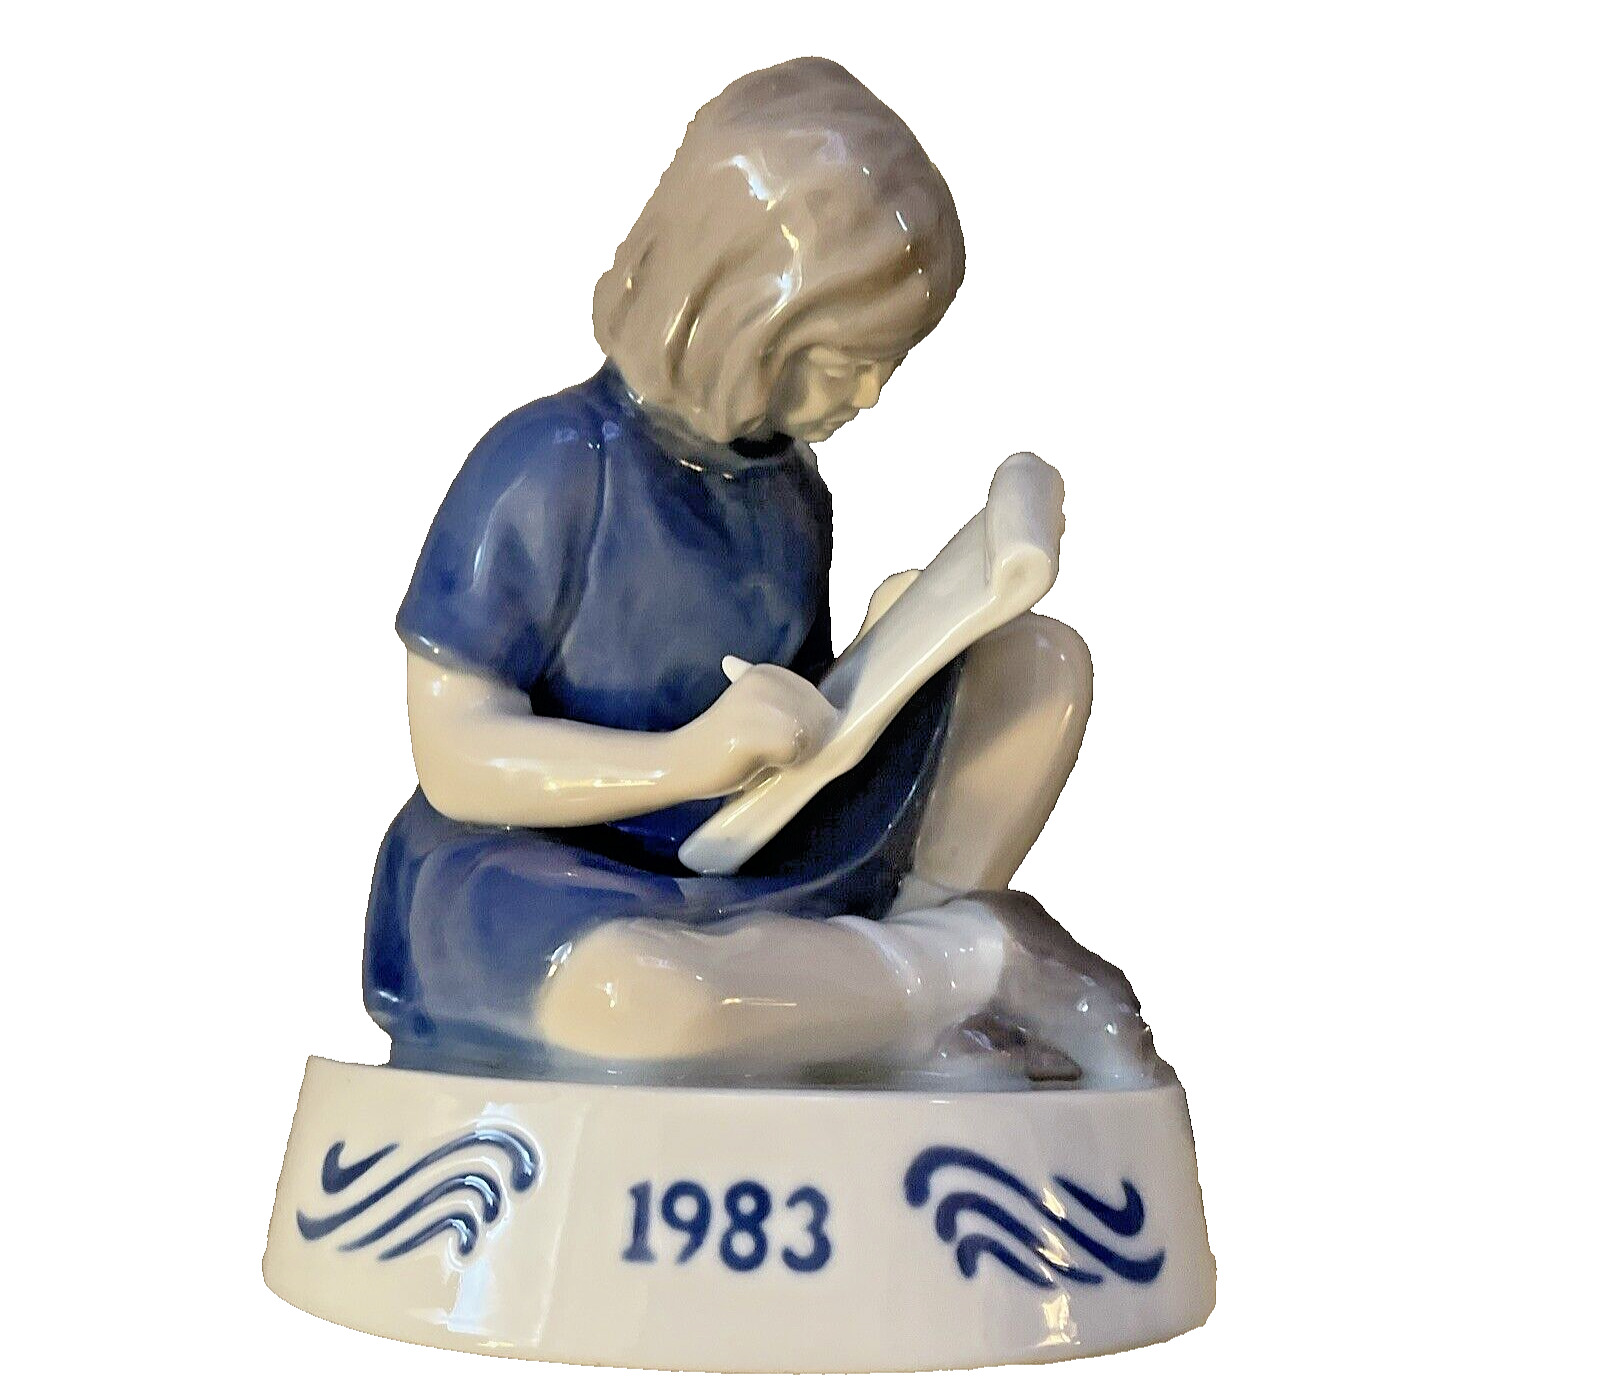 Bing & Grondahl Limited Edition Porcelain 1983 Young Artist Figurine